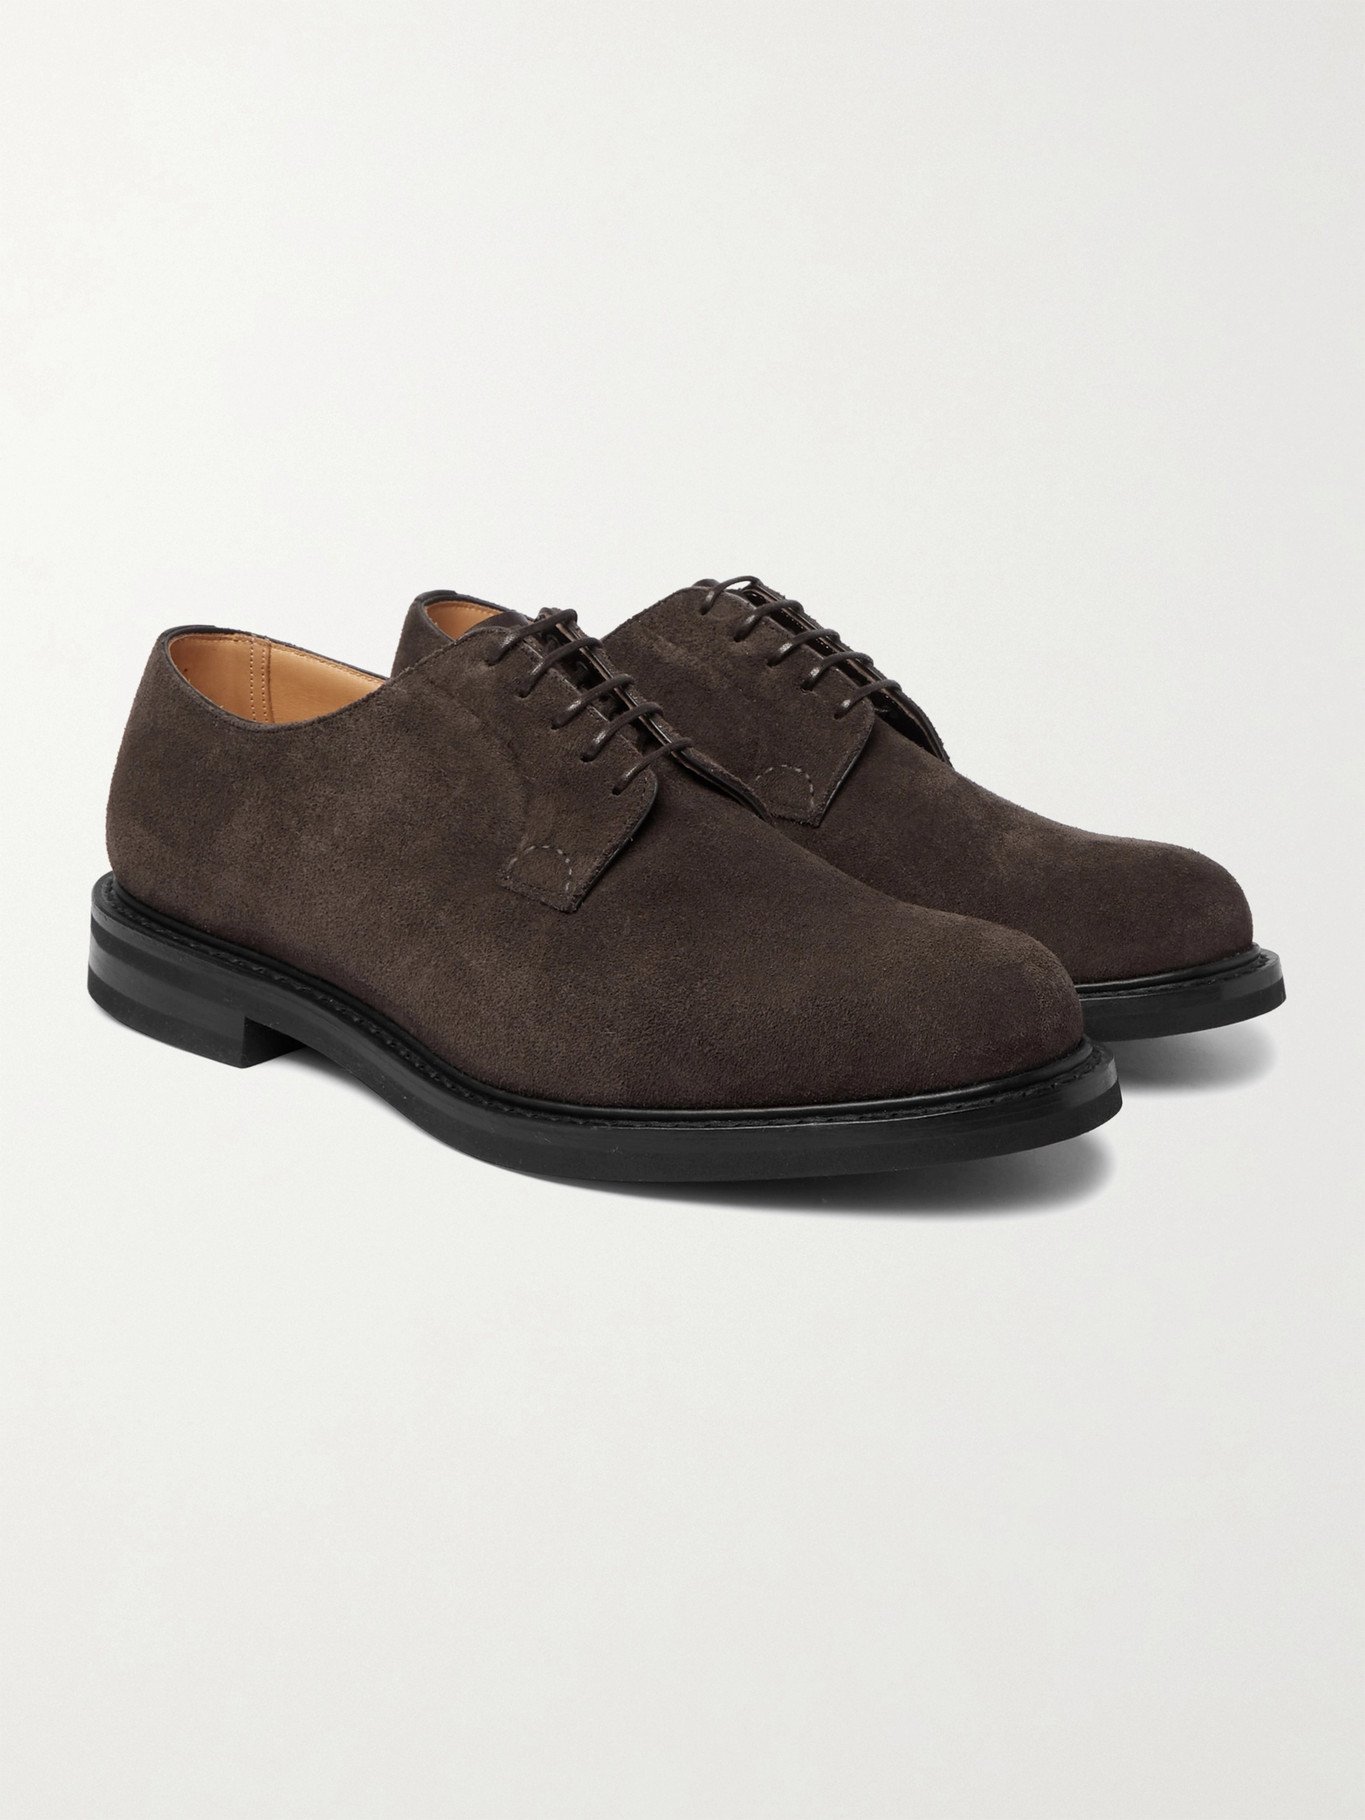 CHURCH'S - Shannon Suede Derby Shoes - Brown Church's